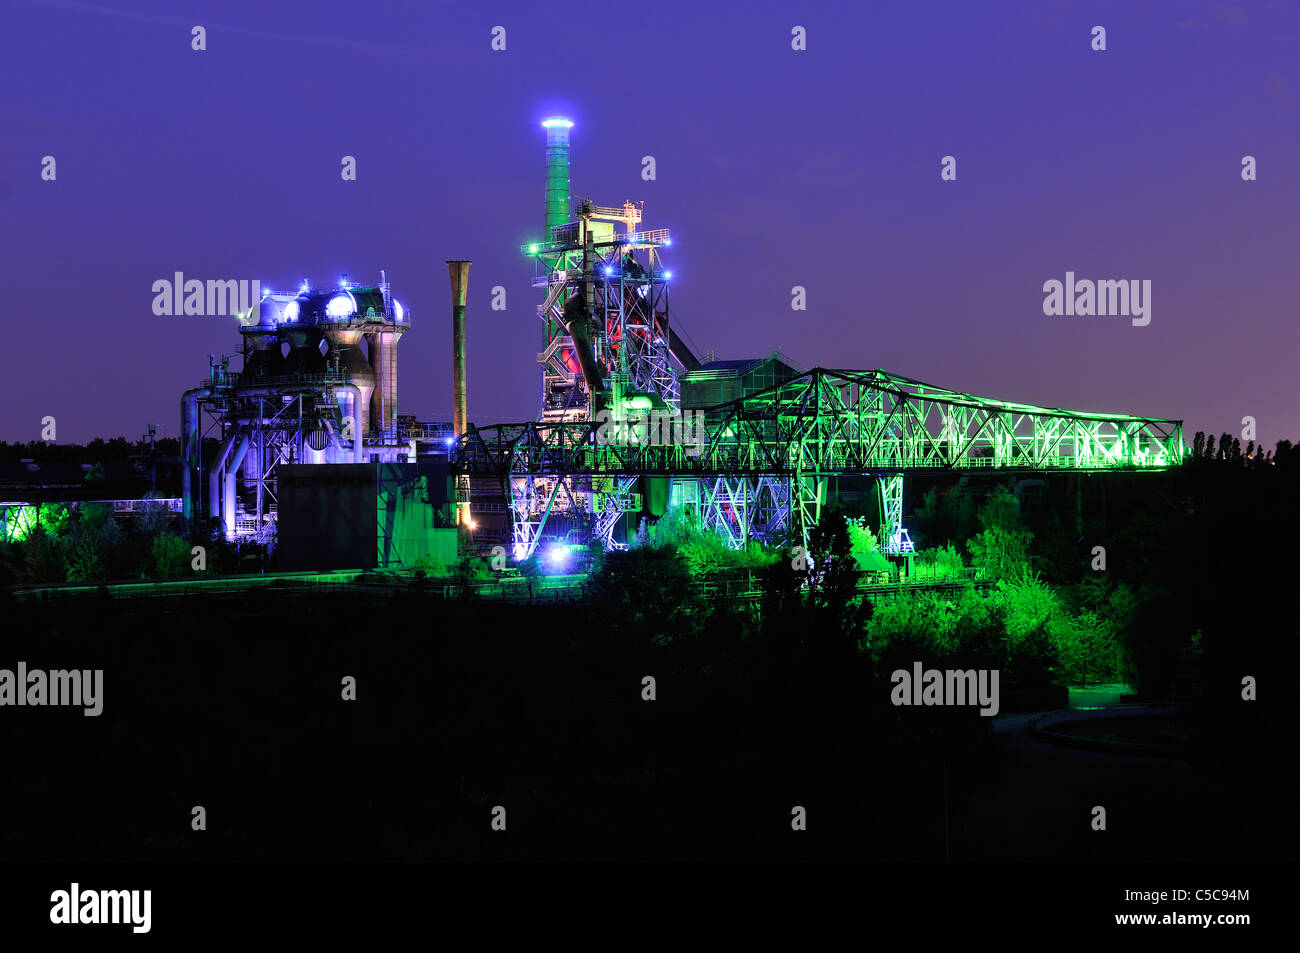 Night shot of Landschaftspark Nord, old illuminated industrial ruins in Duisburg, Germany Stock Photo